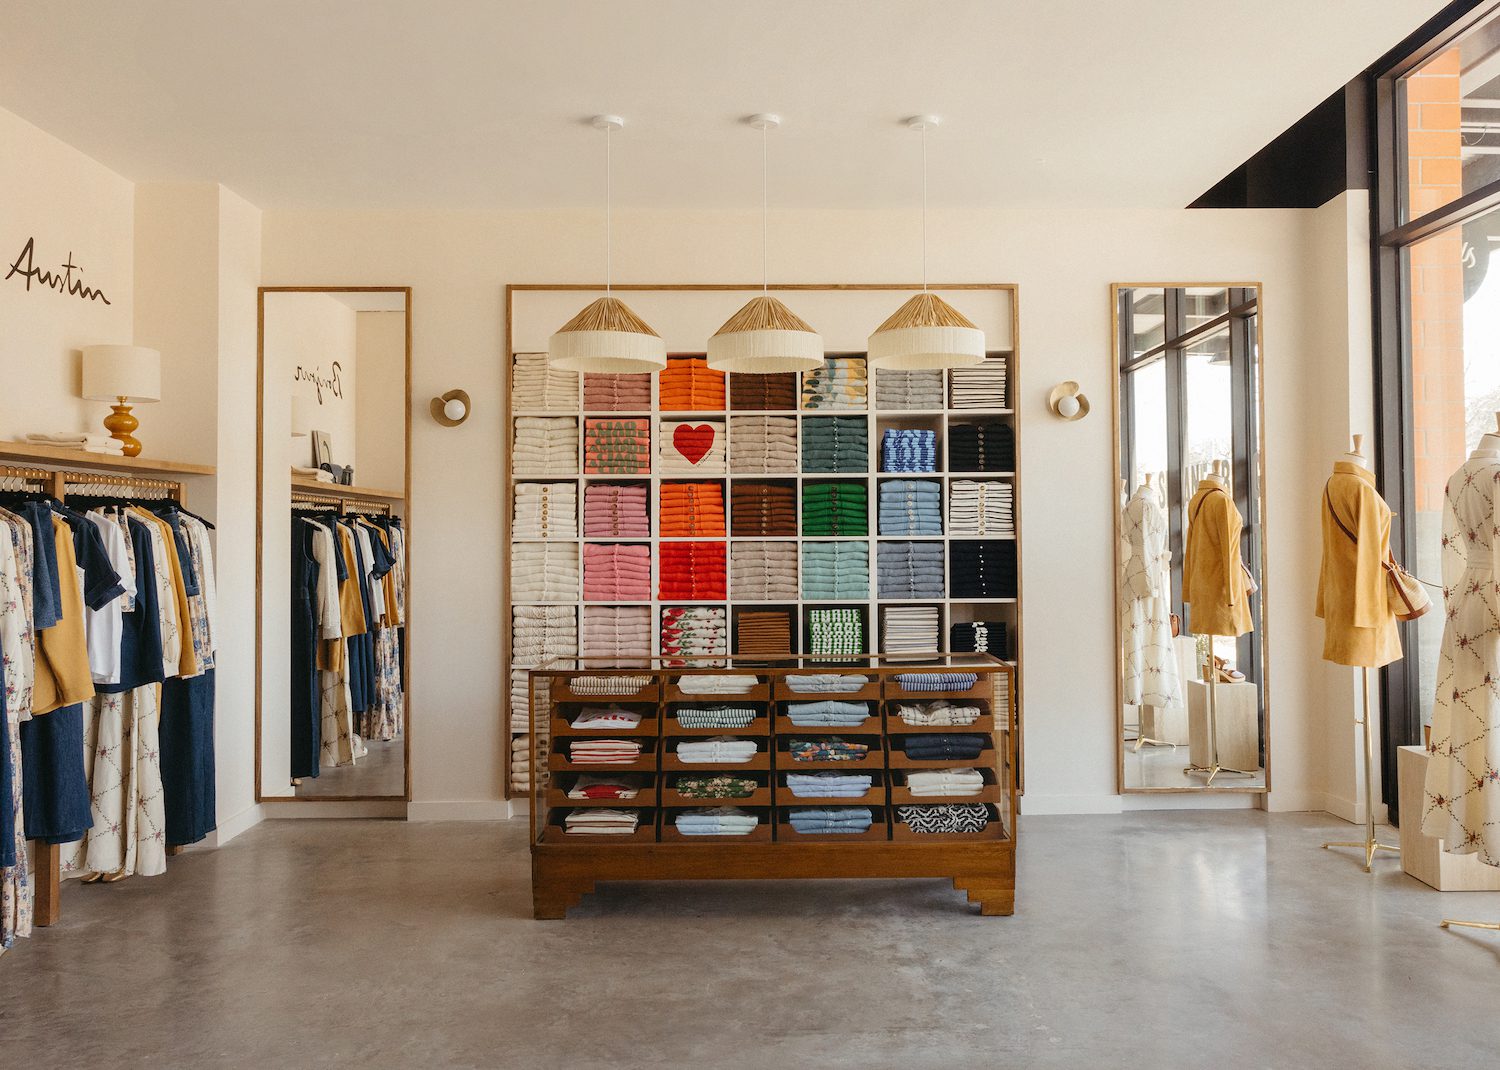 Store image of colorful wall of sweaters